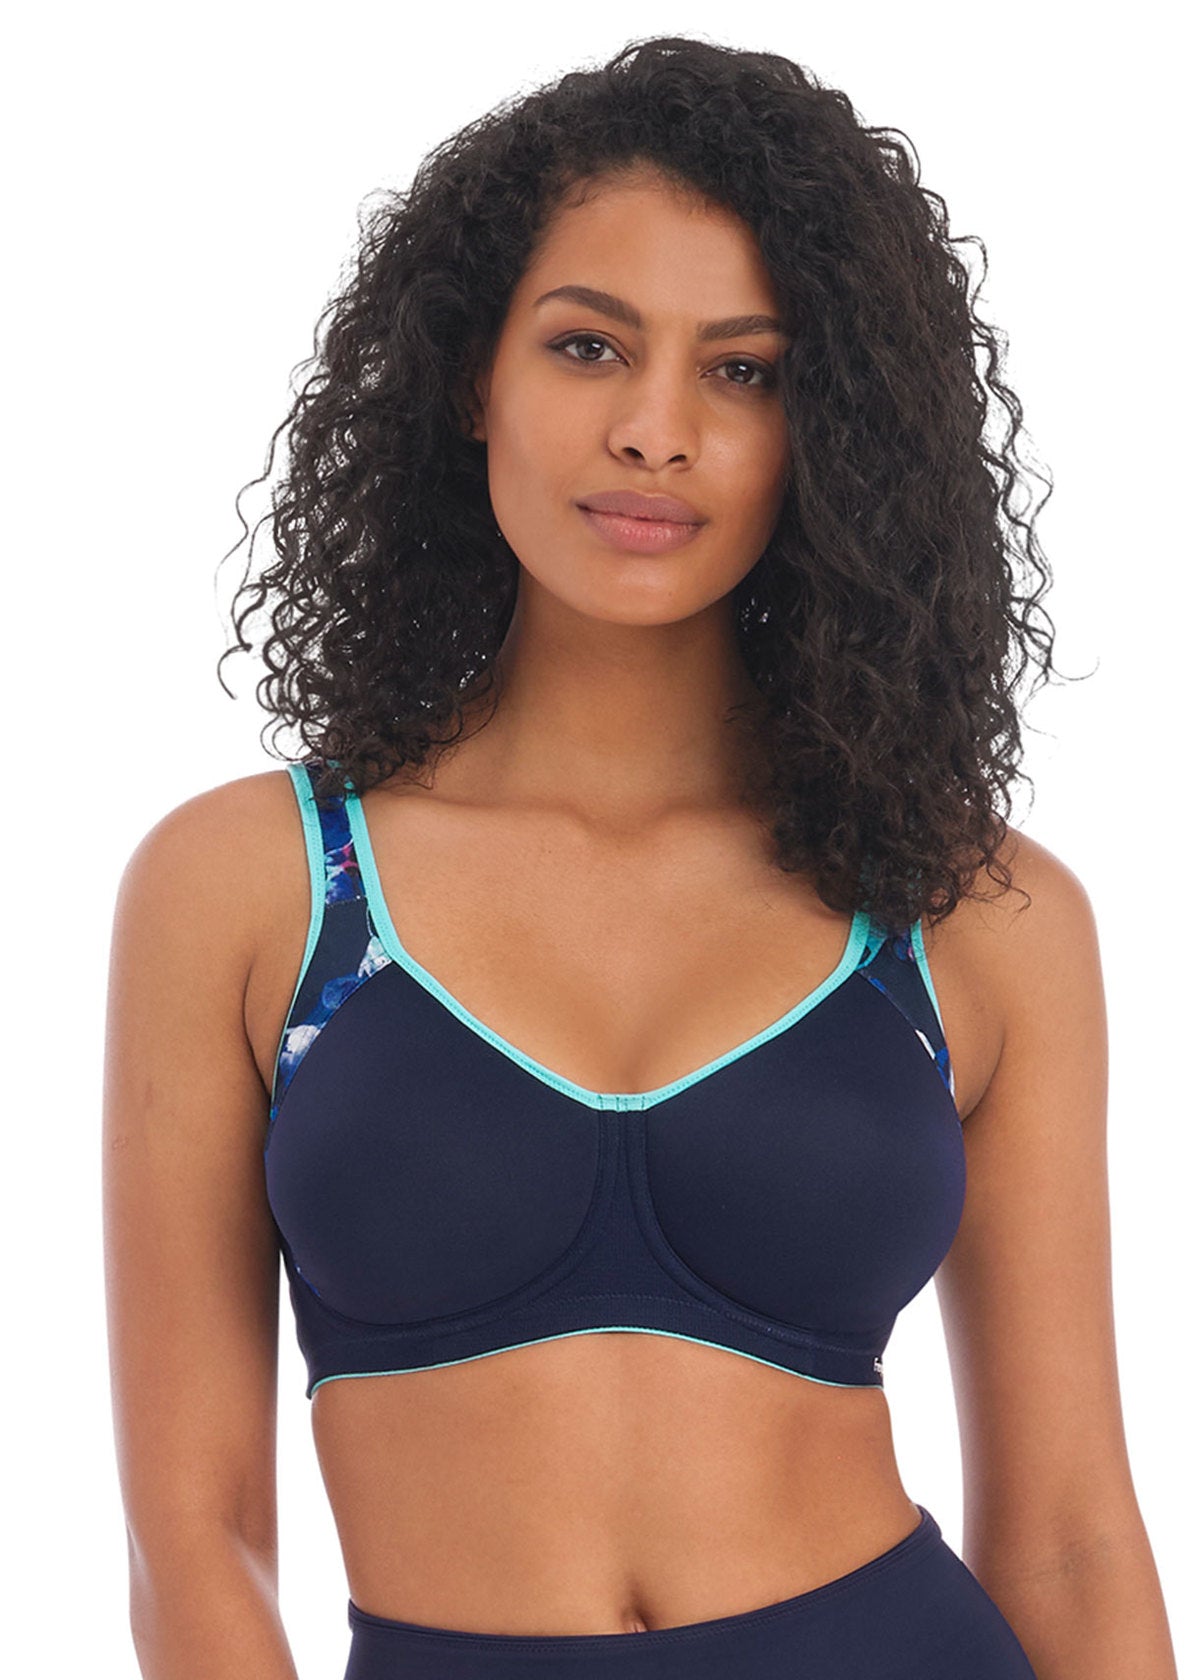 Sports Bras 36GG, Bras for Large Breasts